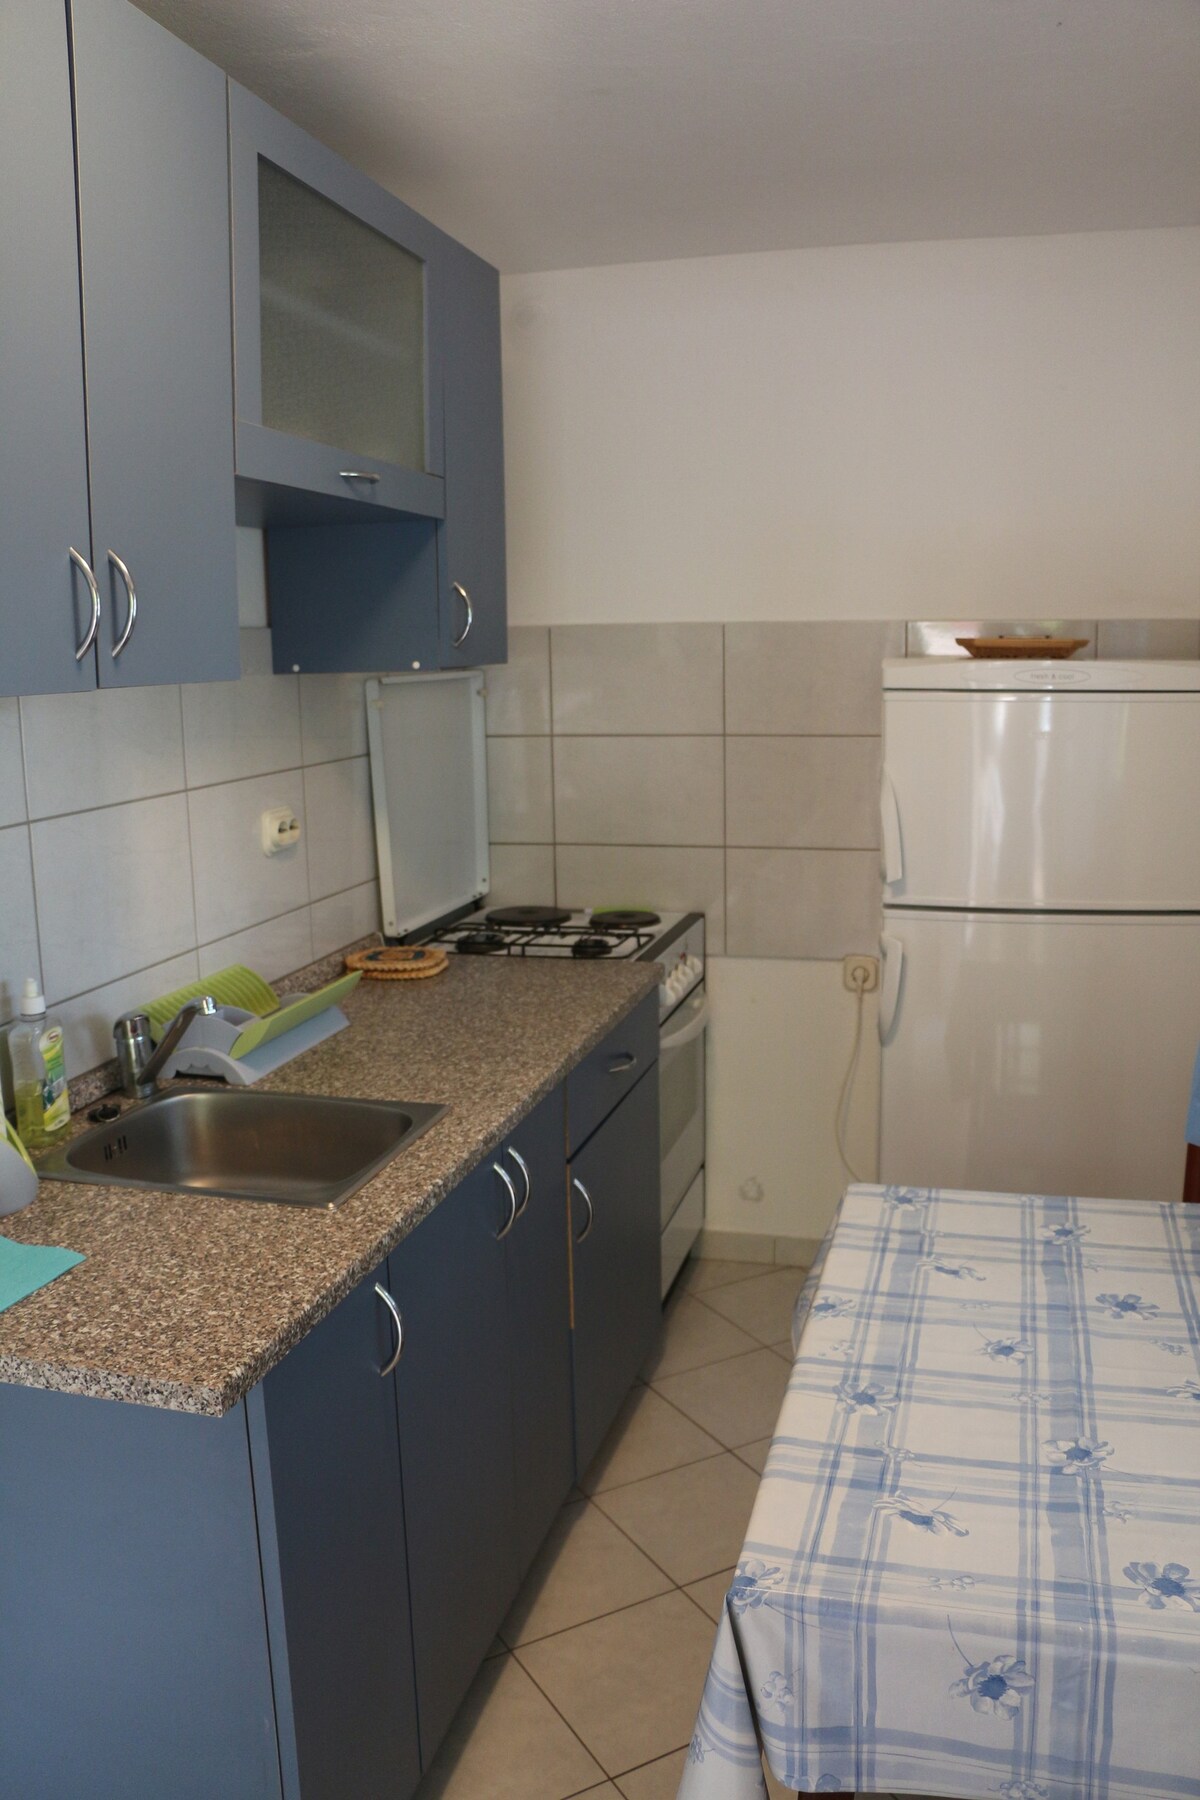 A-12420-a Two bedroom apartment with terrace